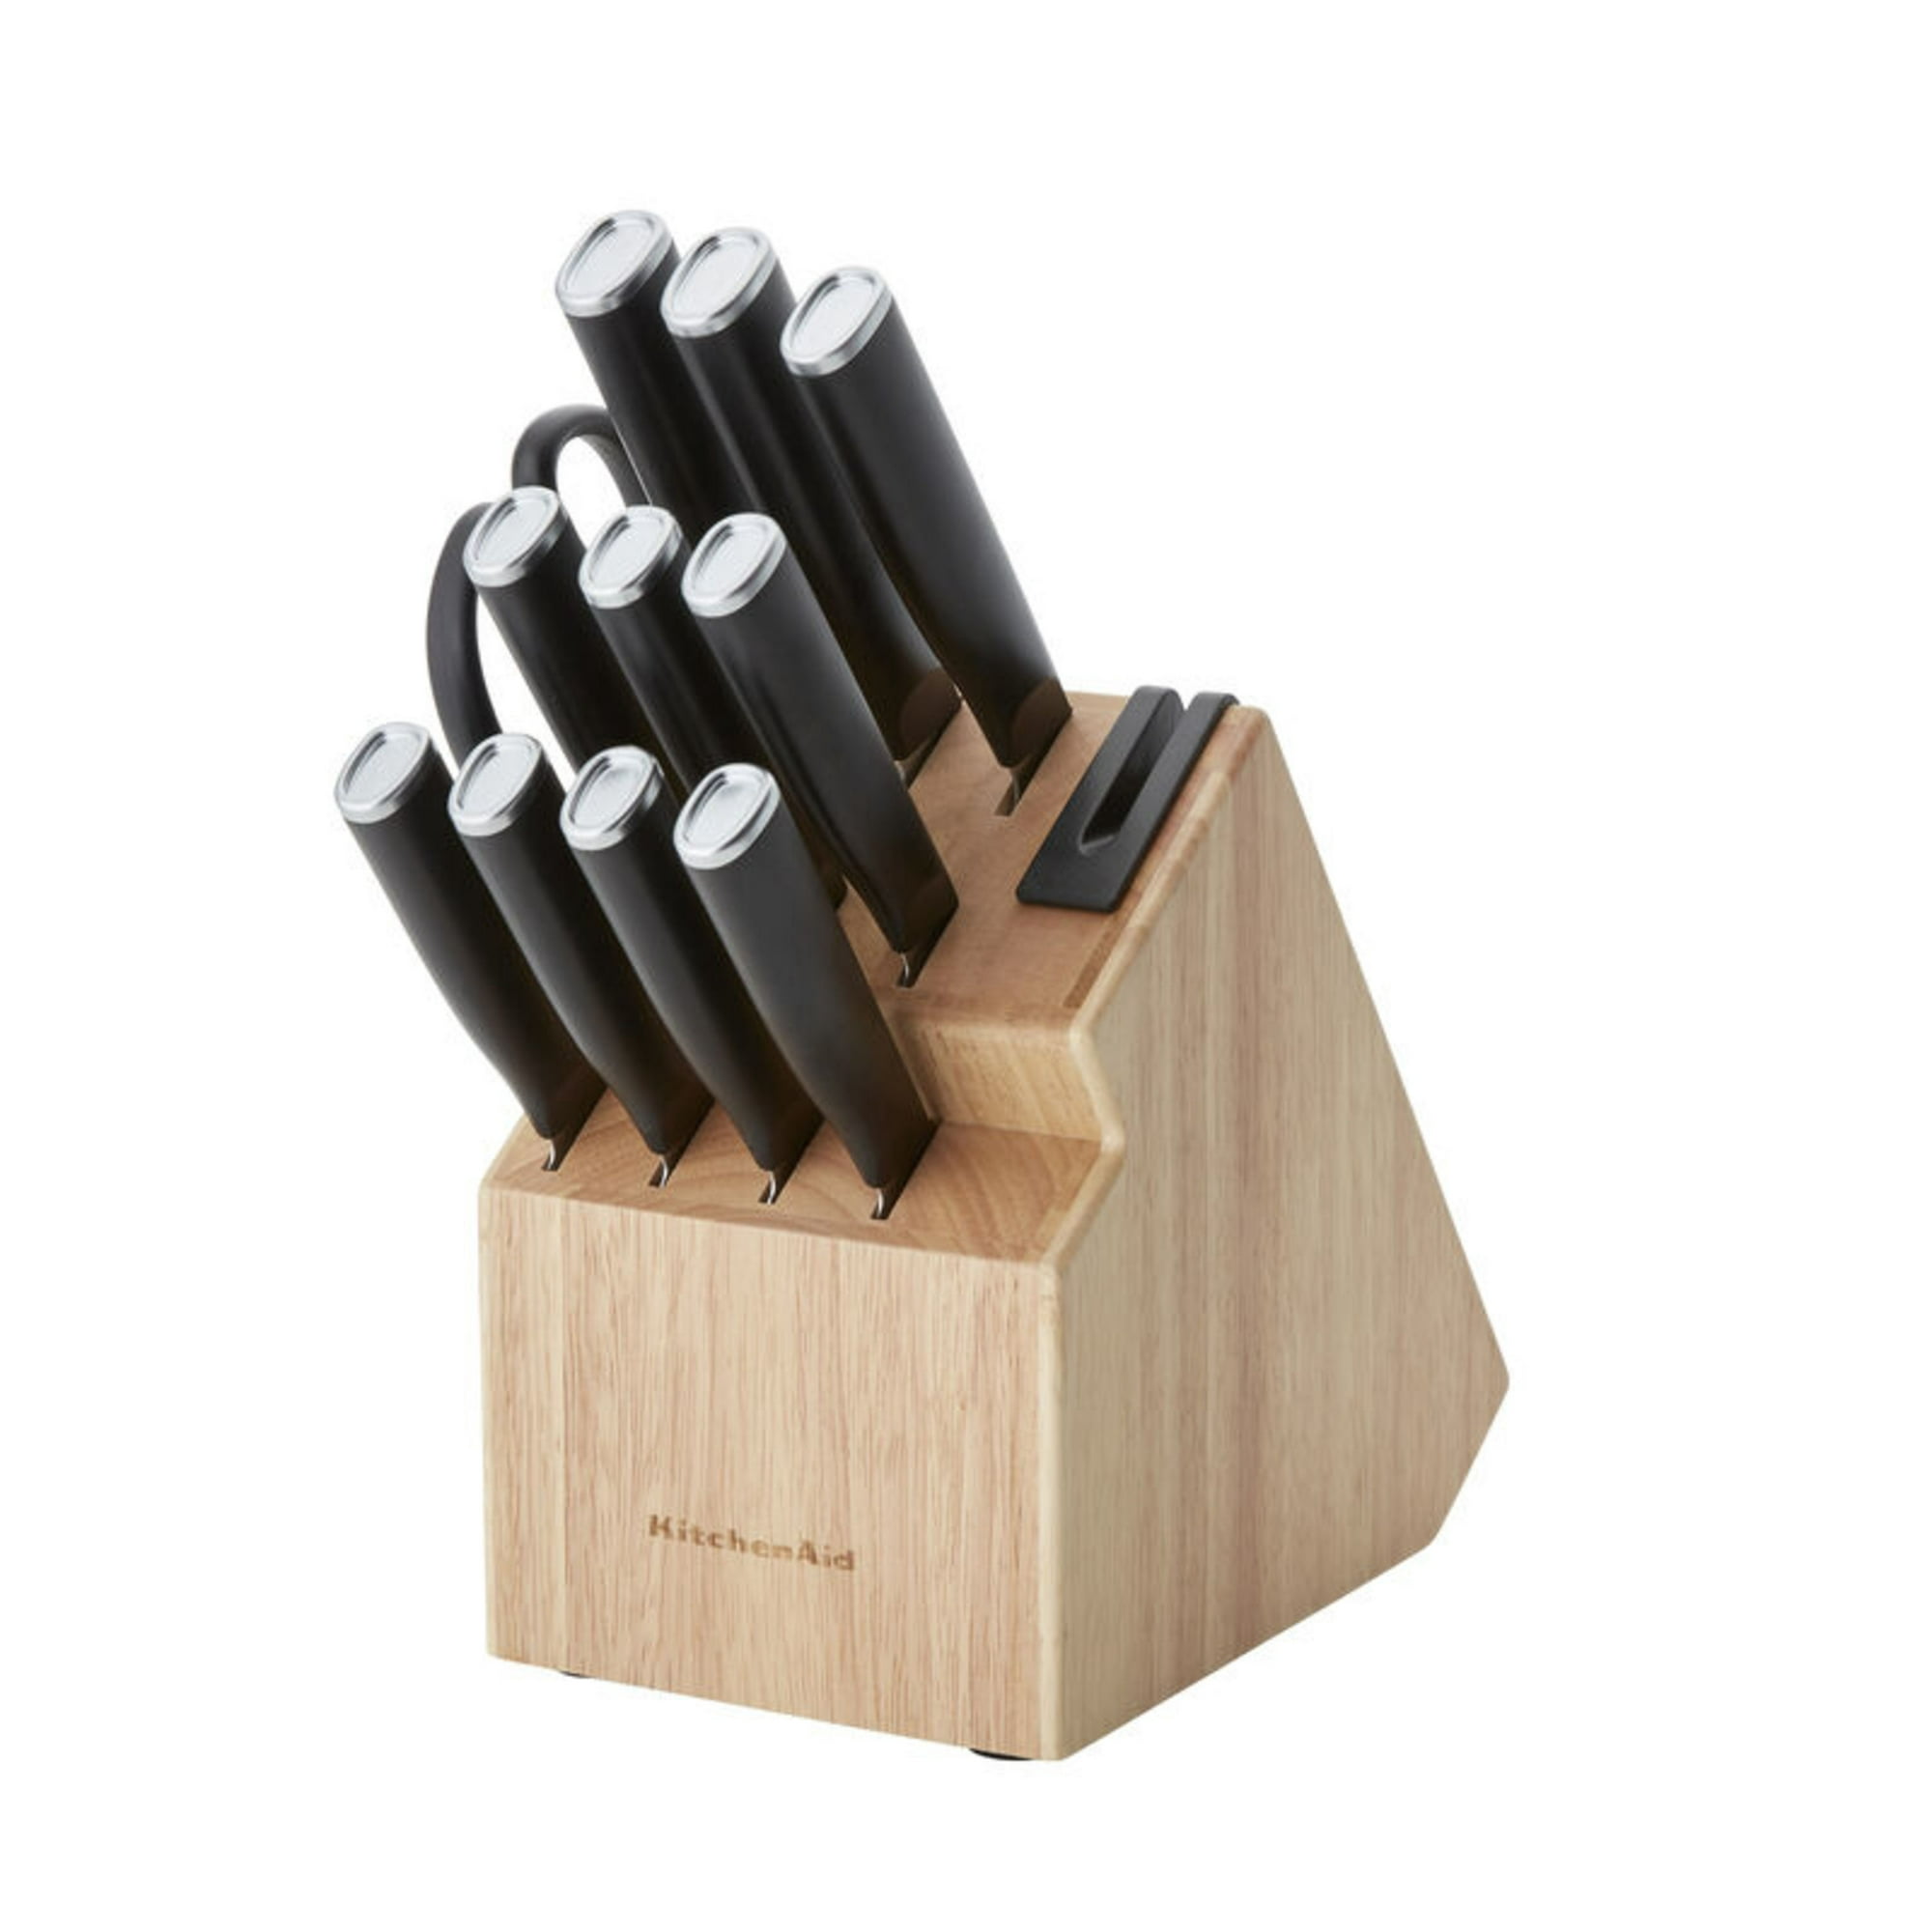 KitchenAid Classic Japanese Steel 12-Piece Knife Block Set with Built-in Knife Sharpener